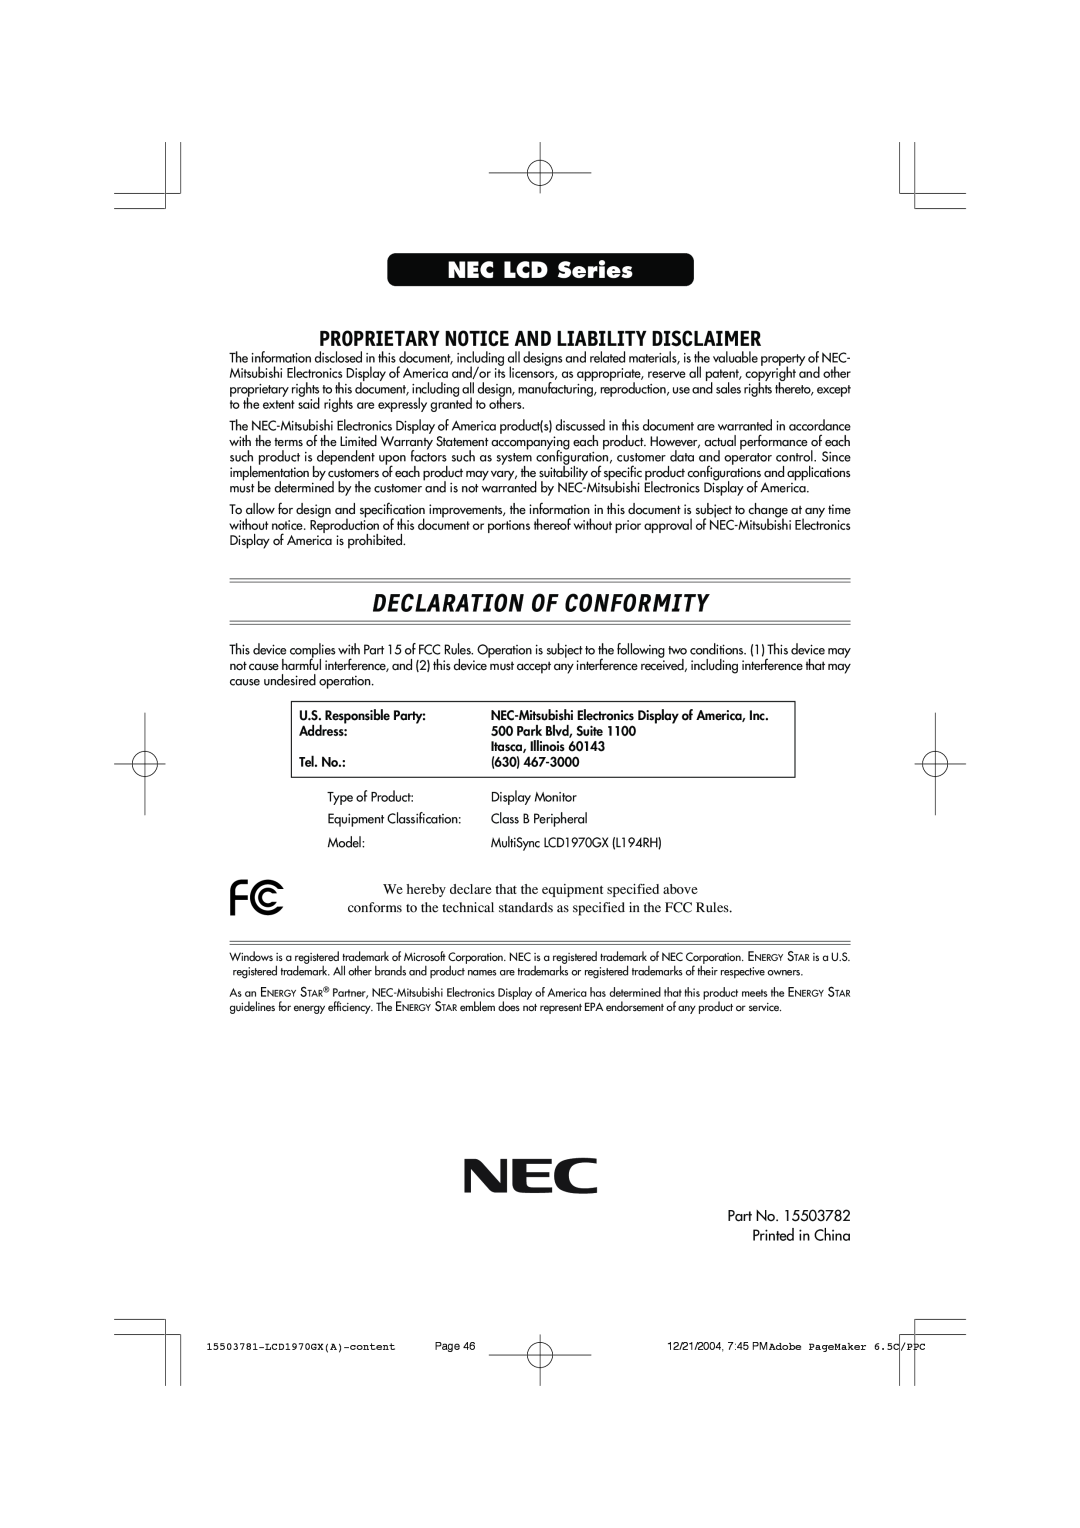 NEC LCD1970GX user manual Declaration Of Conformity, NEC LCD Series, Proprietary Notice And Liability Disclaimer 